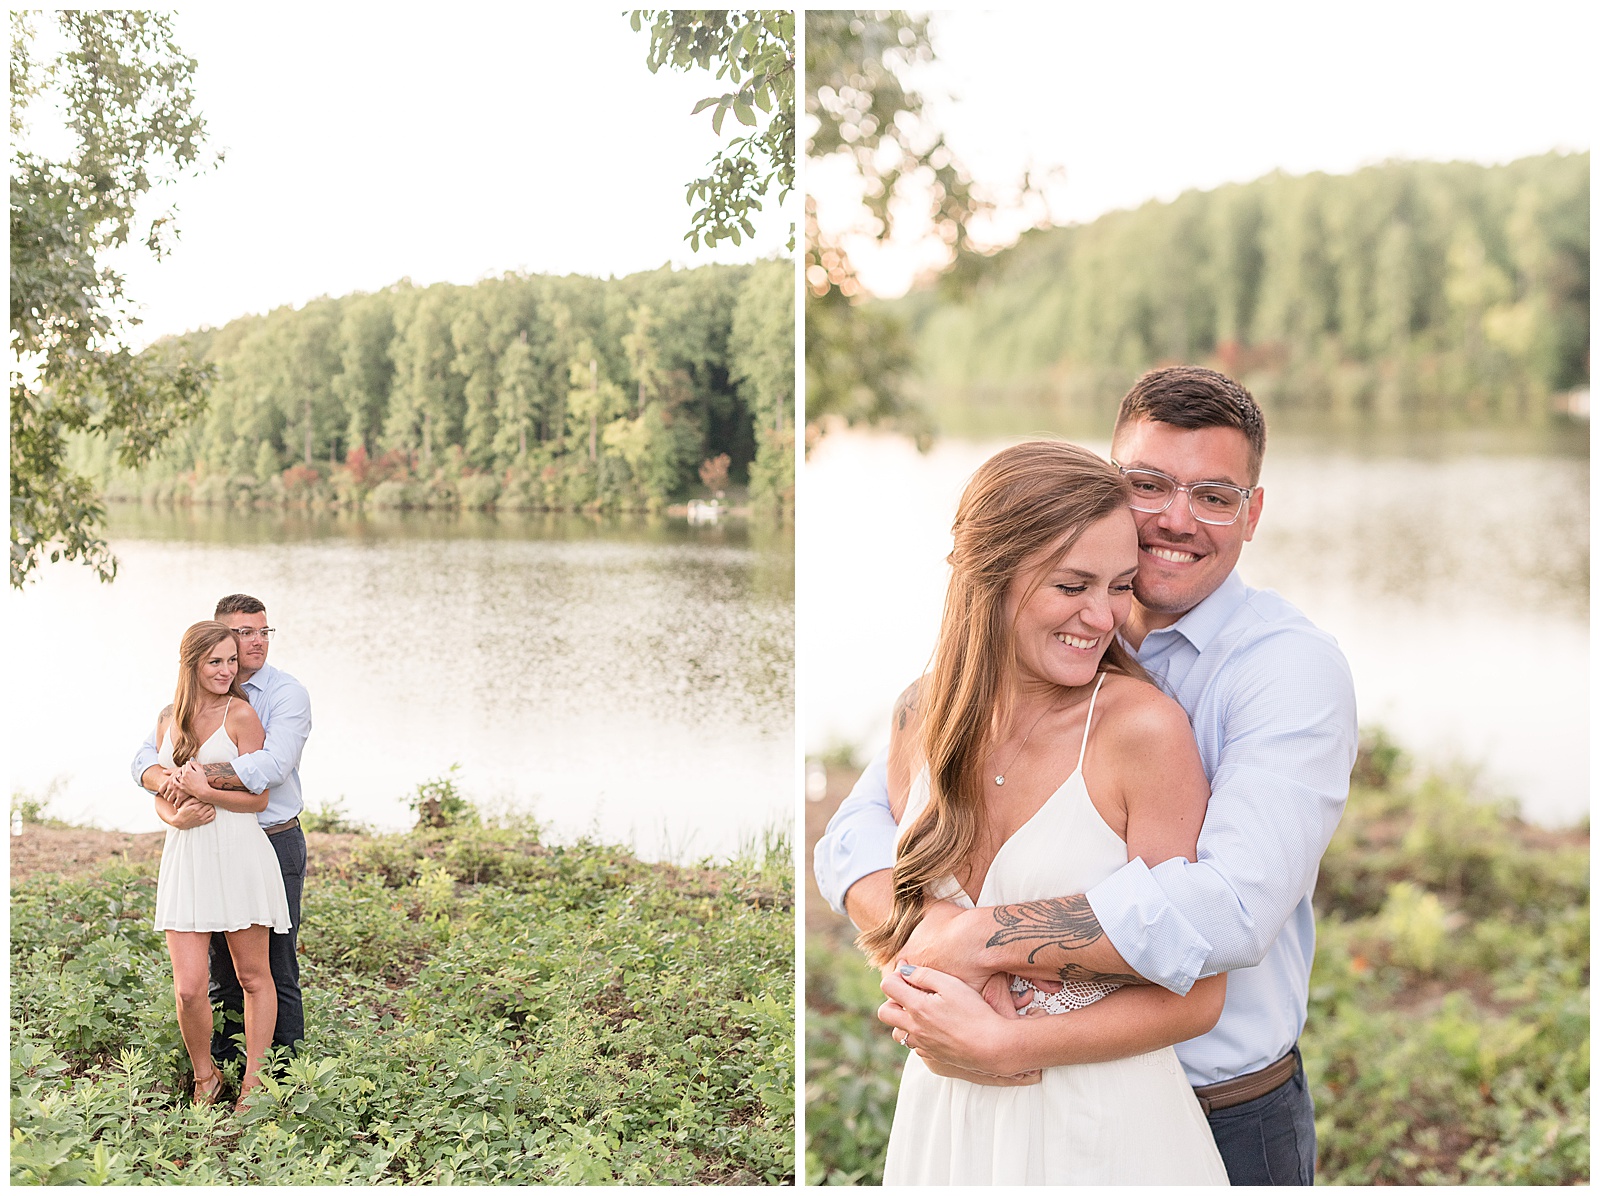 couple is standing on left side of photo and the guy is standing behind the girl hugging her tightly and they are resting their heads against one another while standing green plants along the water with trees and sky around and behind them at Hibernia County Park in Chester County, PA, close up photo of couple and the guy is standing behind the girl and hugging her tightly and they are smiling as the girl looks down towards the right side of the photo with plants, water, trees, and sky behind them at Hibernia County Park in Chester County, PA